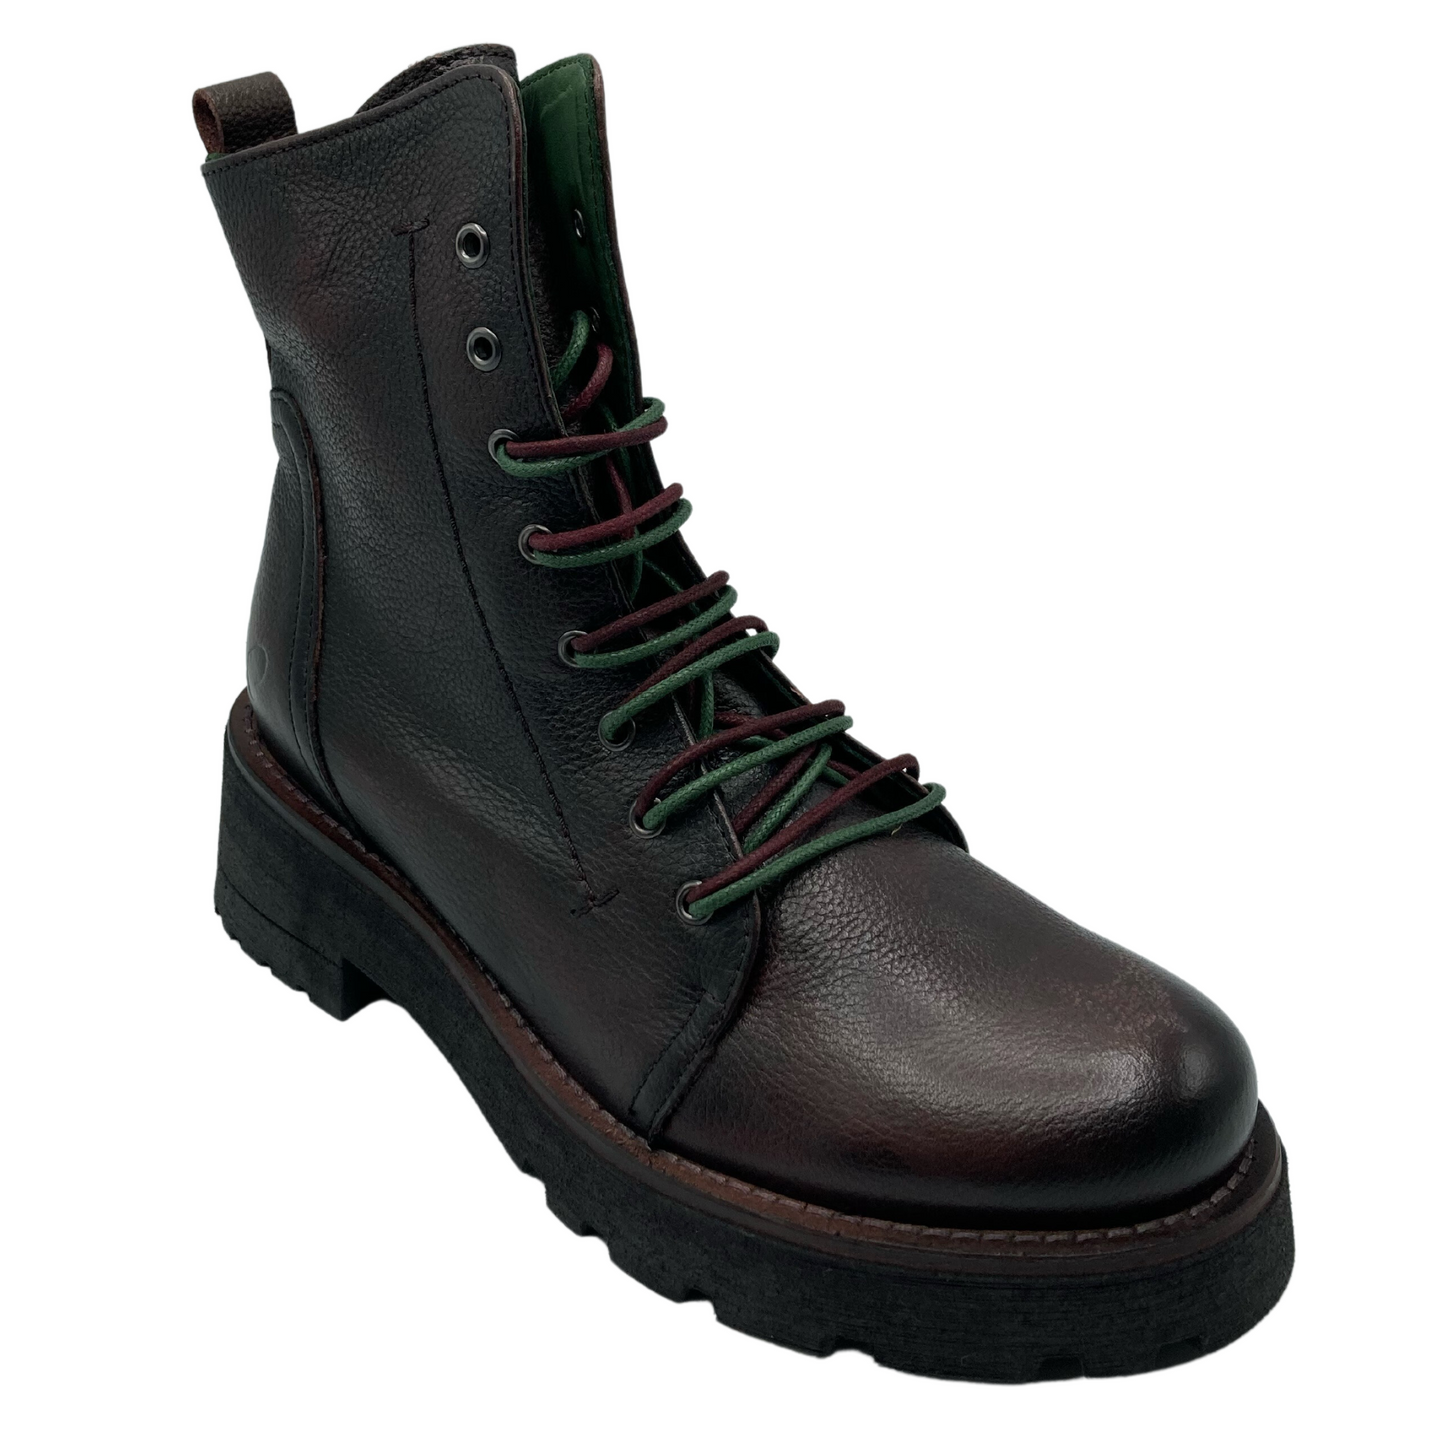 45 degree angled view of berry coloured leather combat boot with maroon and green laces. 